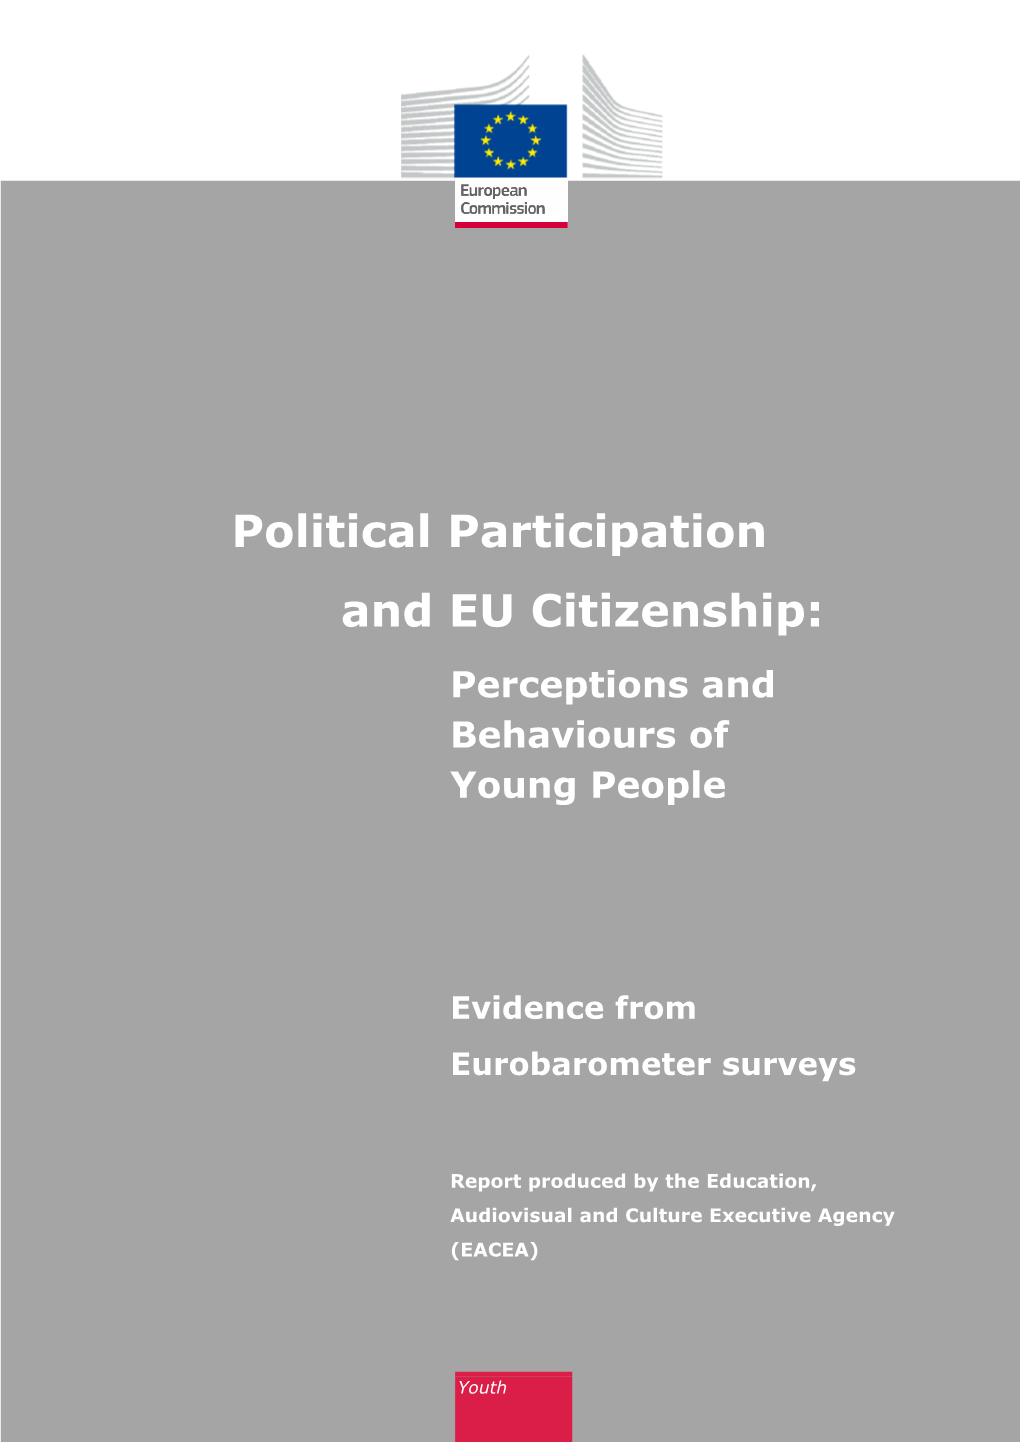 Political Participation and EU Citizenship: Perceptions and Behaviours of Young People